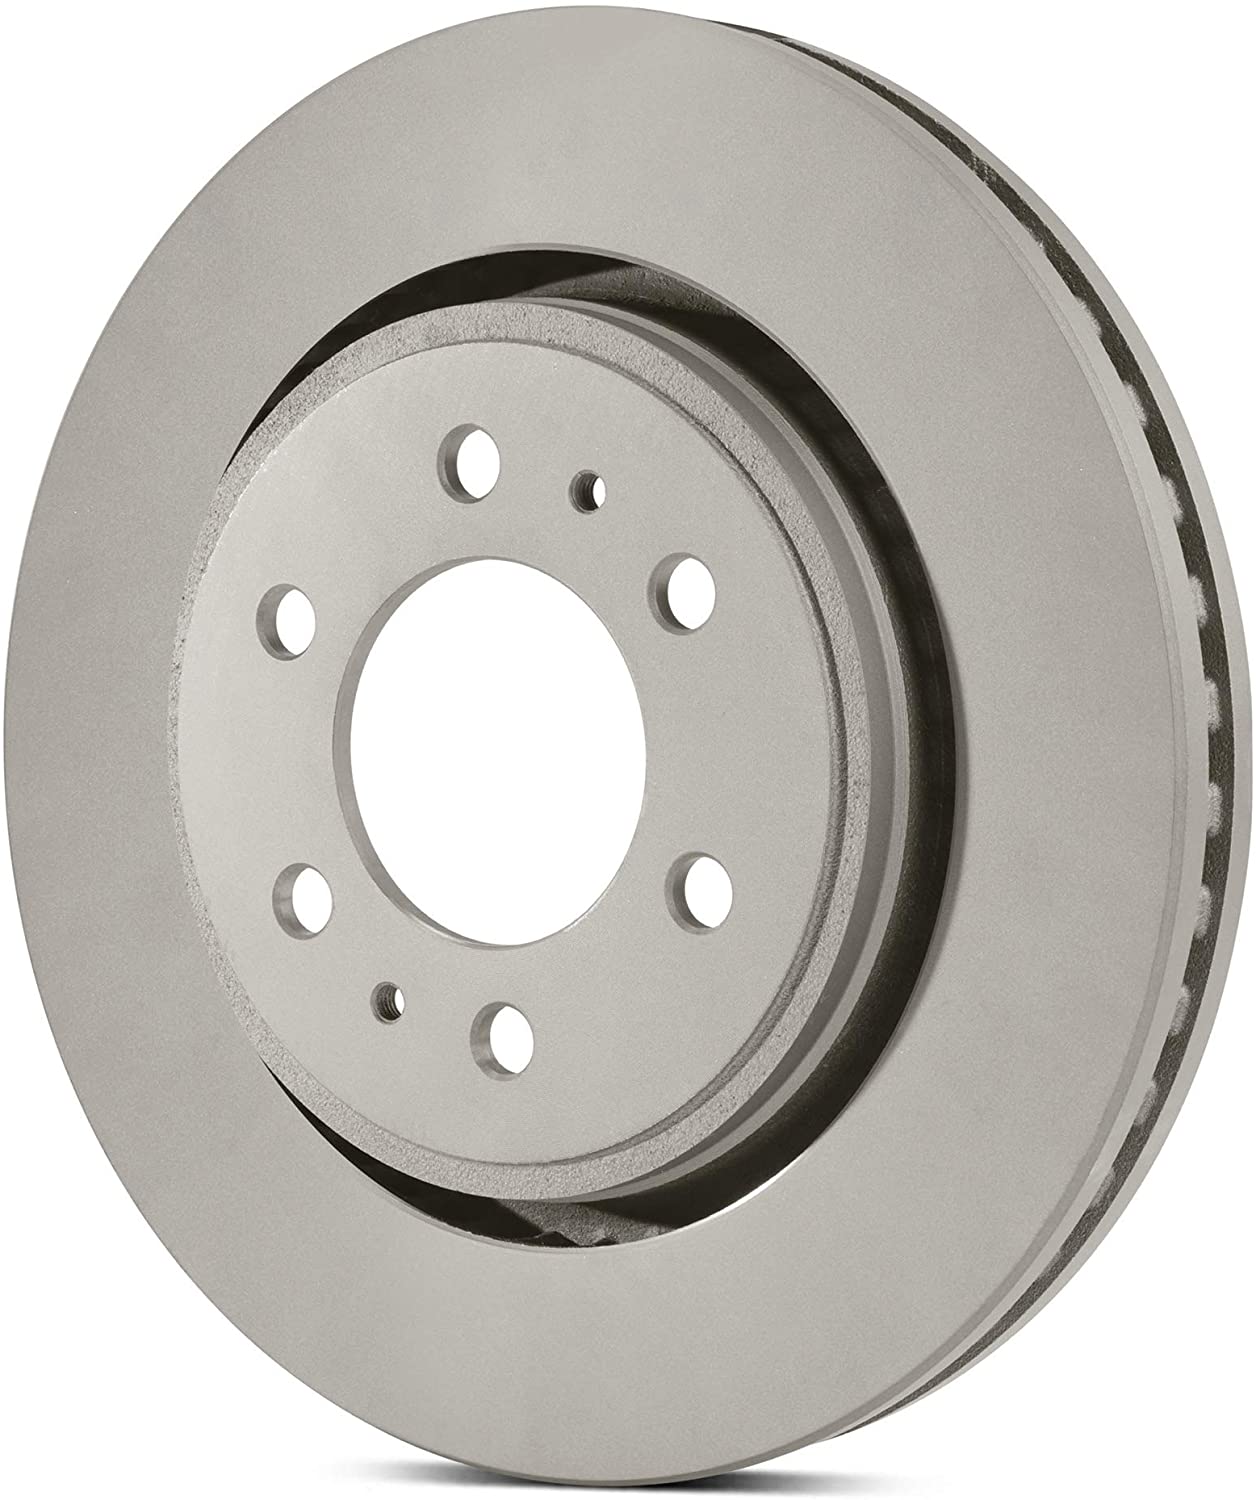 Goodyear Brakes 2126076GY Premium AntiOx Coated Front Brake Rotor Automotive Vehicle Replacement Part for for Select Sedan Cars